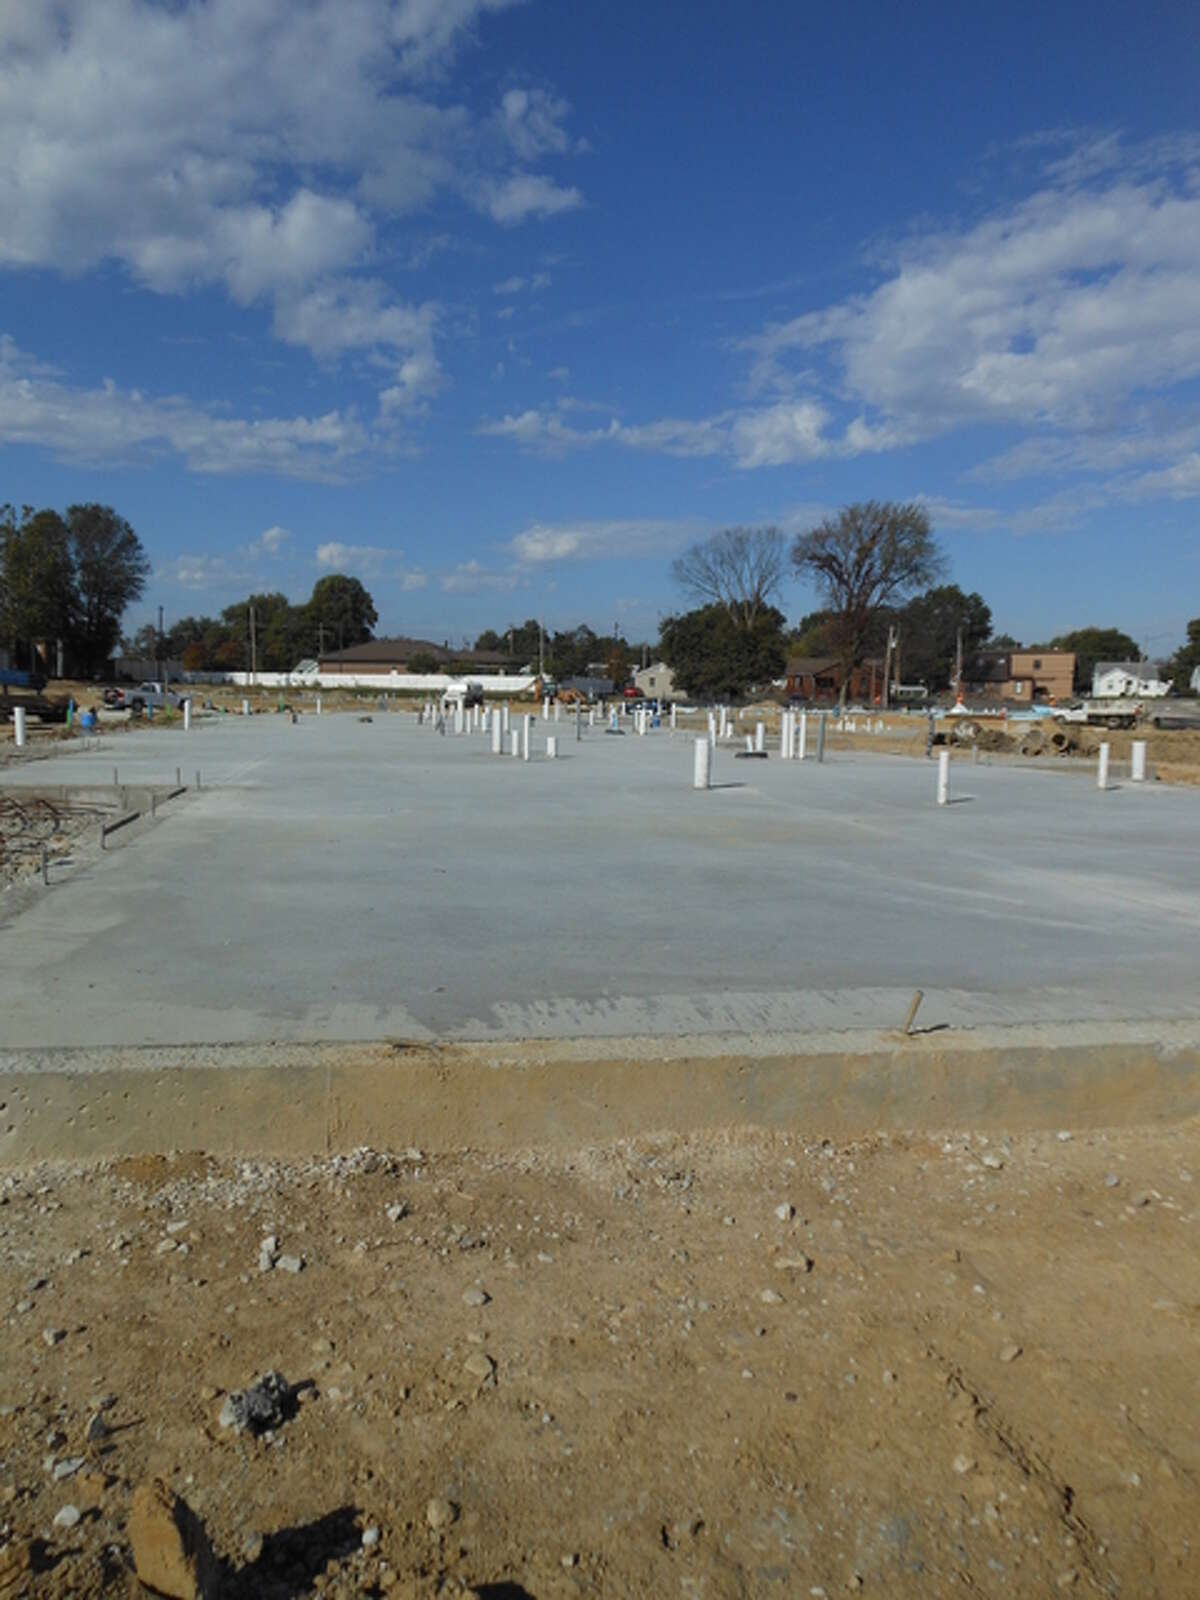 A concrete pad awaits construction workers from Morrissey Construction Co., of Godfrey, on which to build one of 13 apartment buildings at Madison County Housing Authority’s former Northgate complex, to be called Woodland Park apartments.